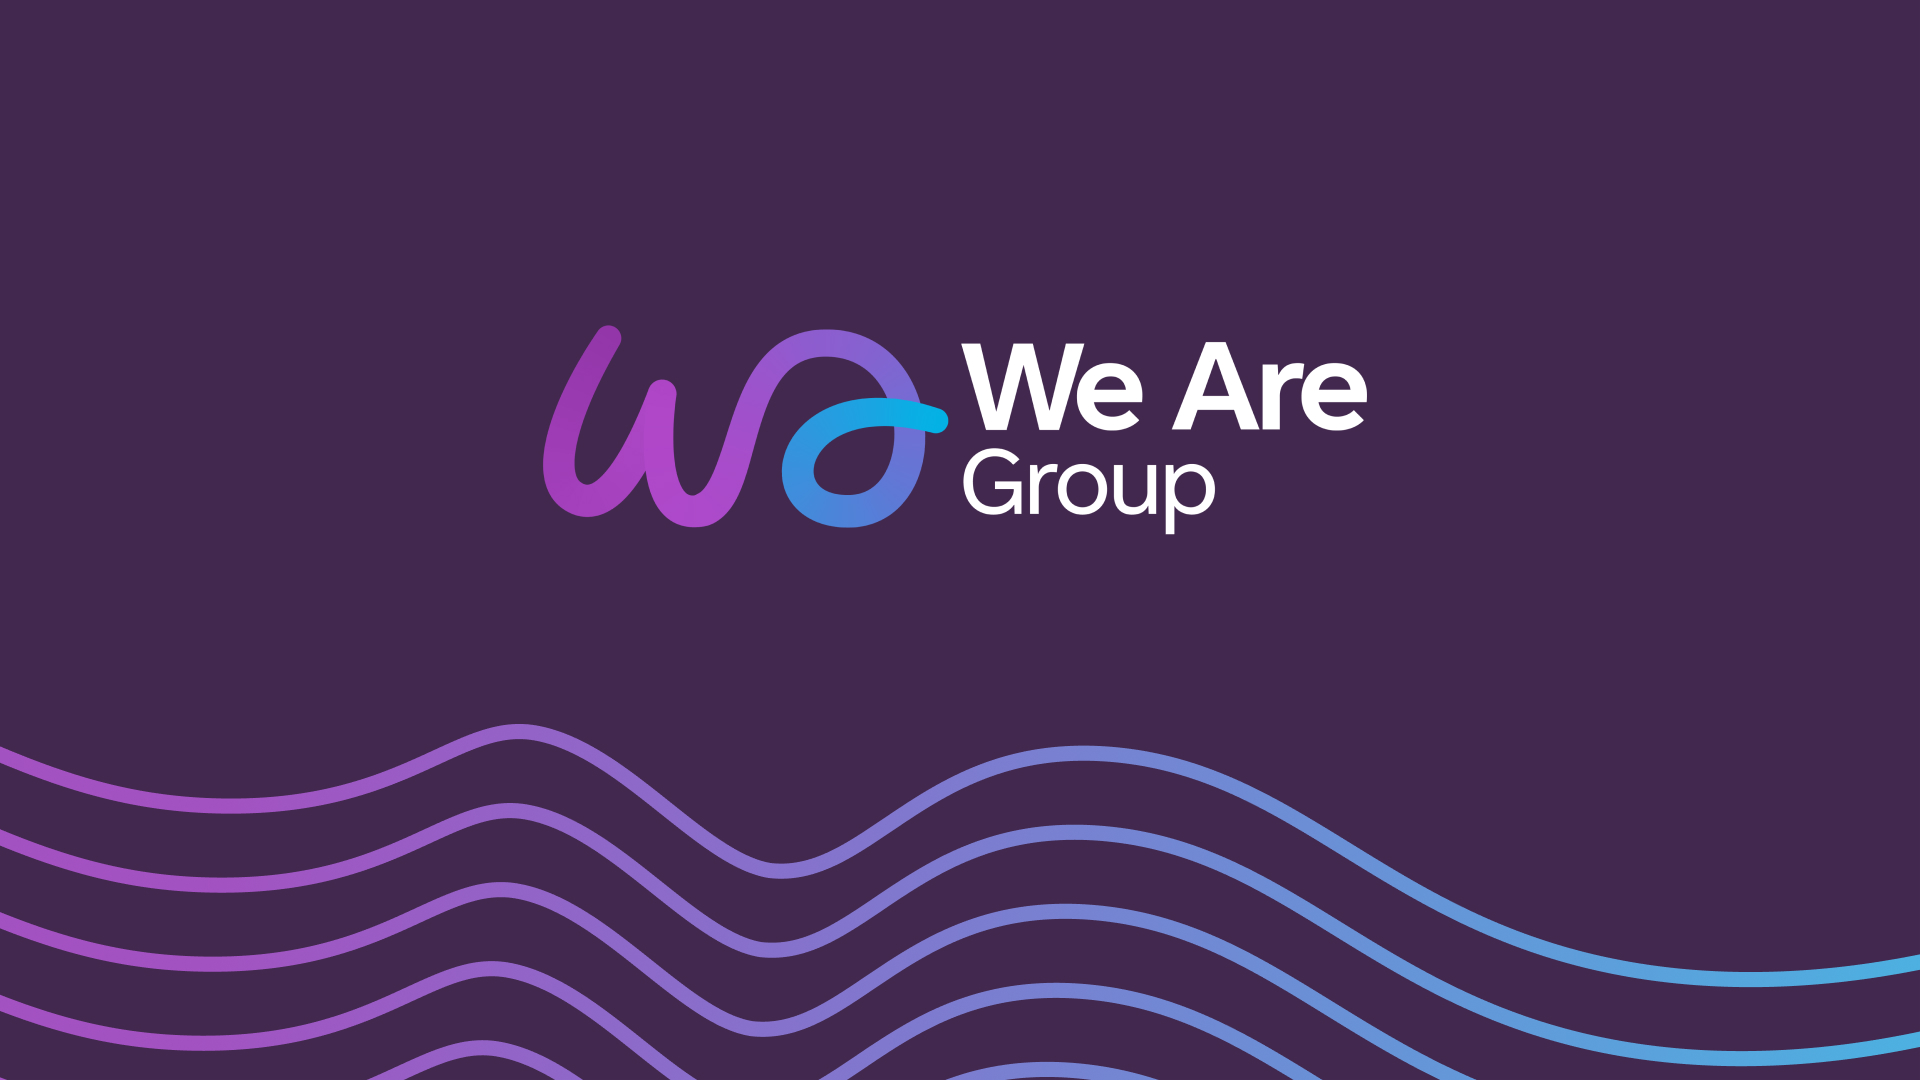 We Are Group – Brand